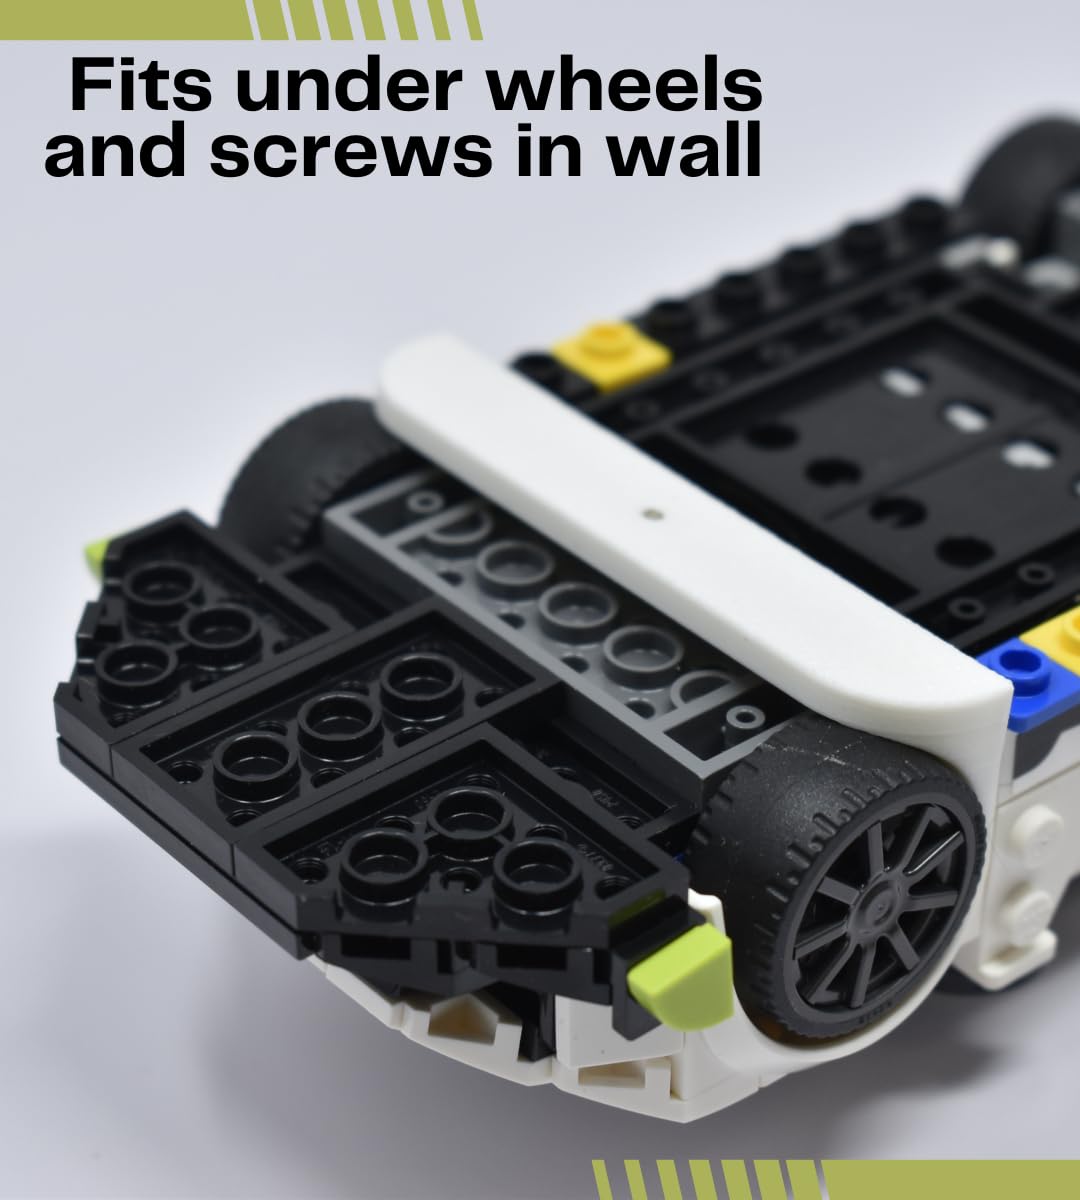 Collectible Car Display Wall Mount | Low Profile Design Compatible with Lego Car Models | Display Cars by Wheels on Wall | Made in USA